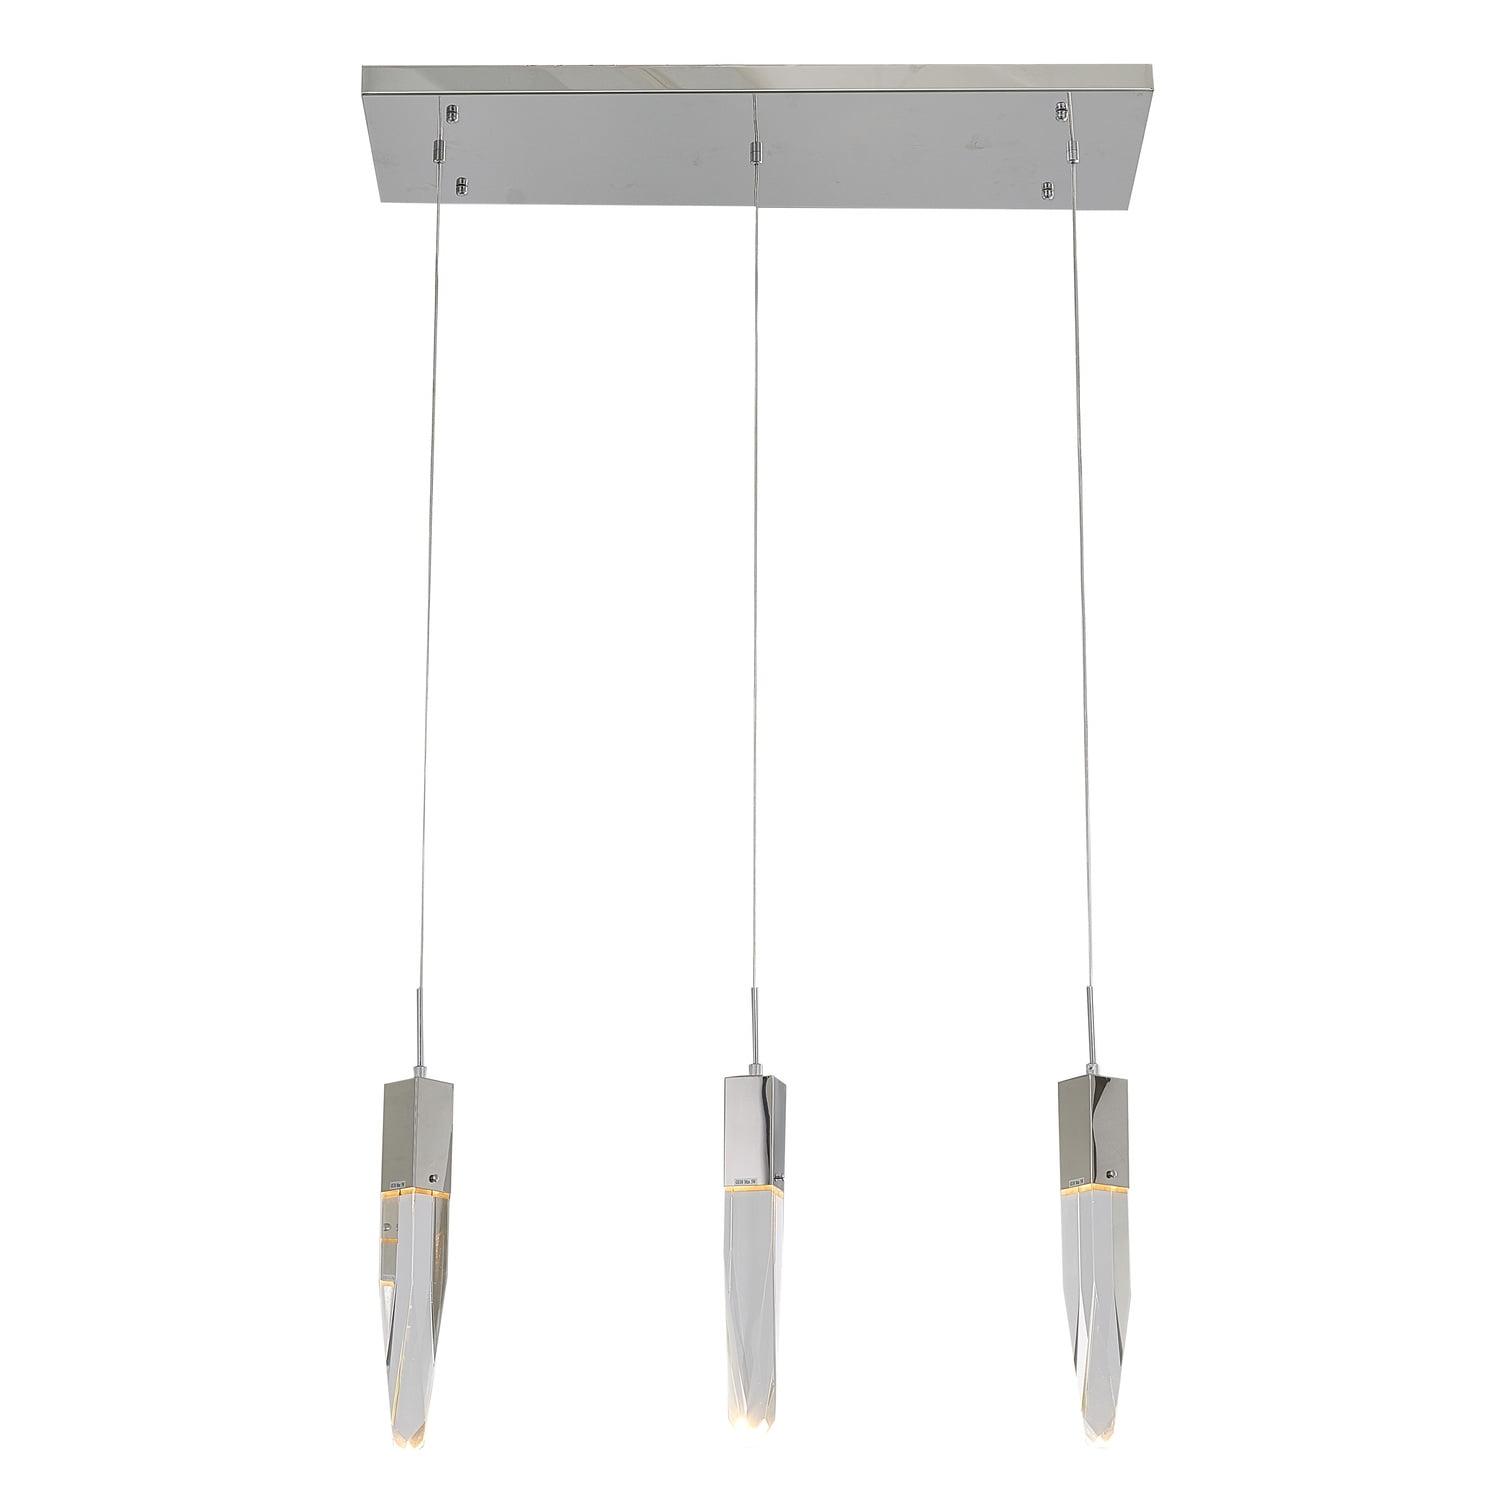 Exquisite Matte Black and Chrome Crystal Island LED Lighting